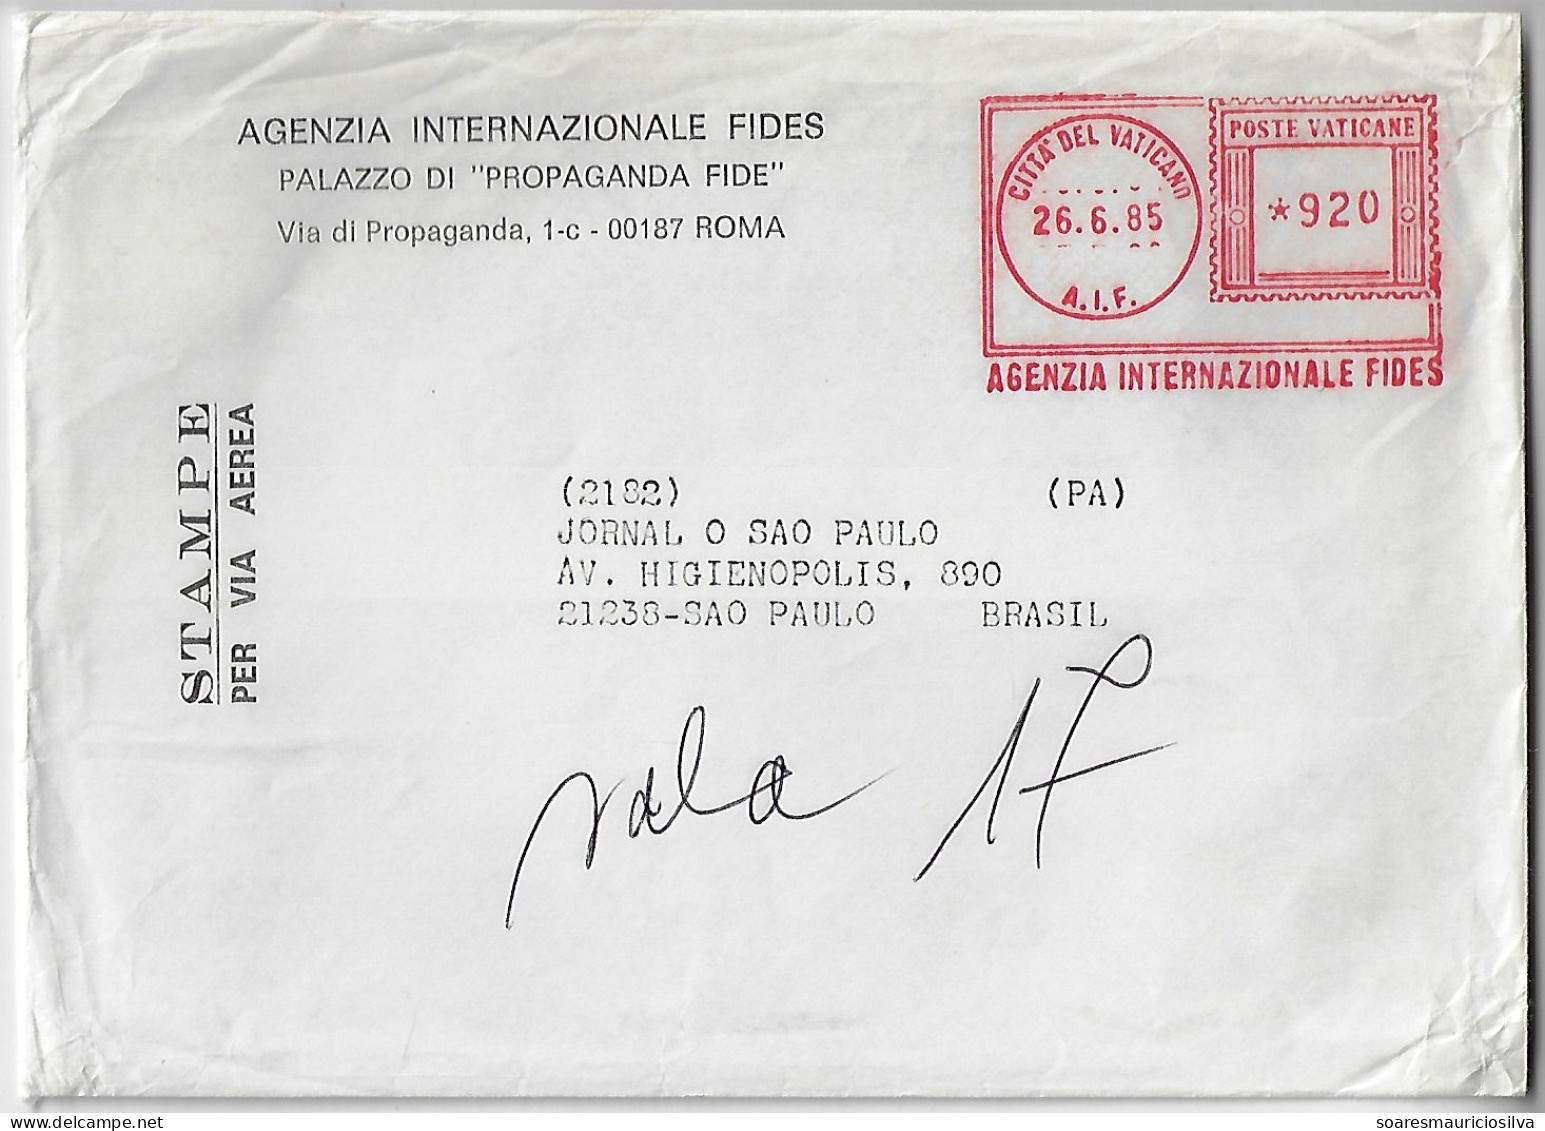 Vatican 1985 Cover Sent To Brazil With Meter Stamp Lirma Slogan Agenzia Internazionale Fides International Faith Agency - Lettres & Documents